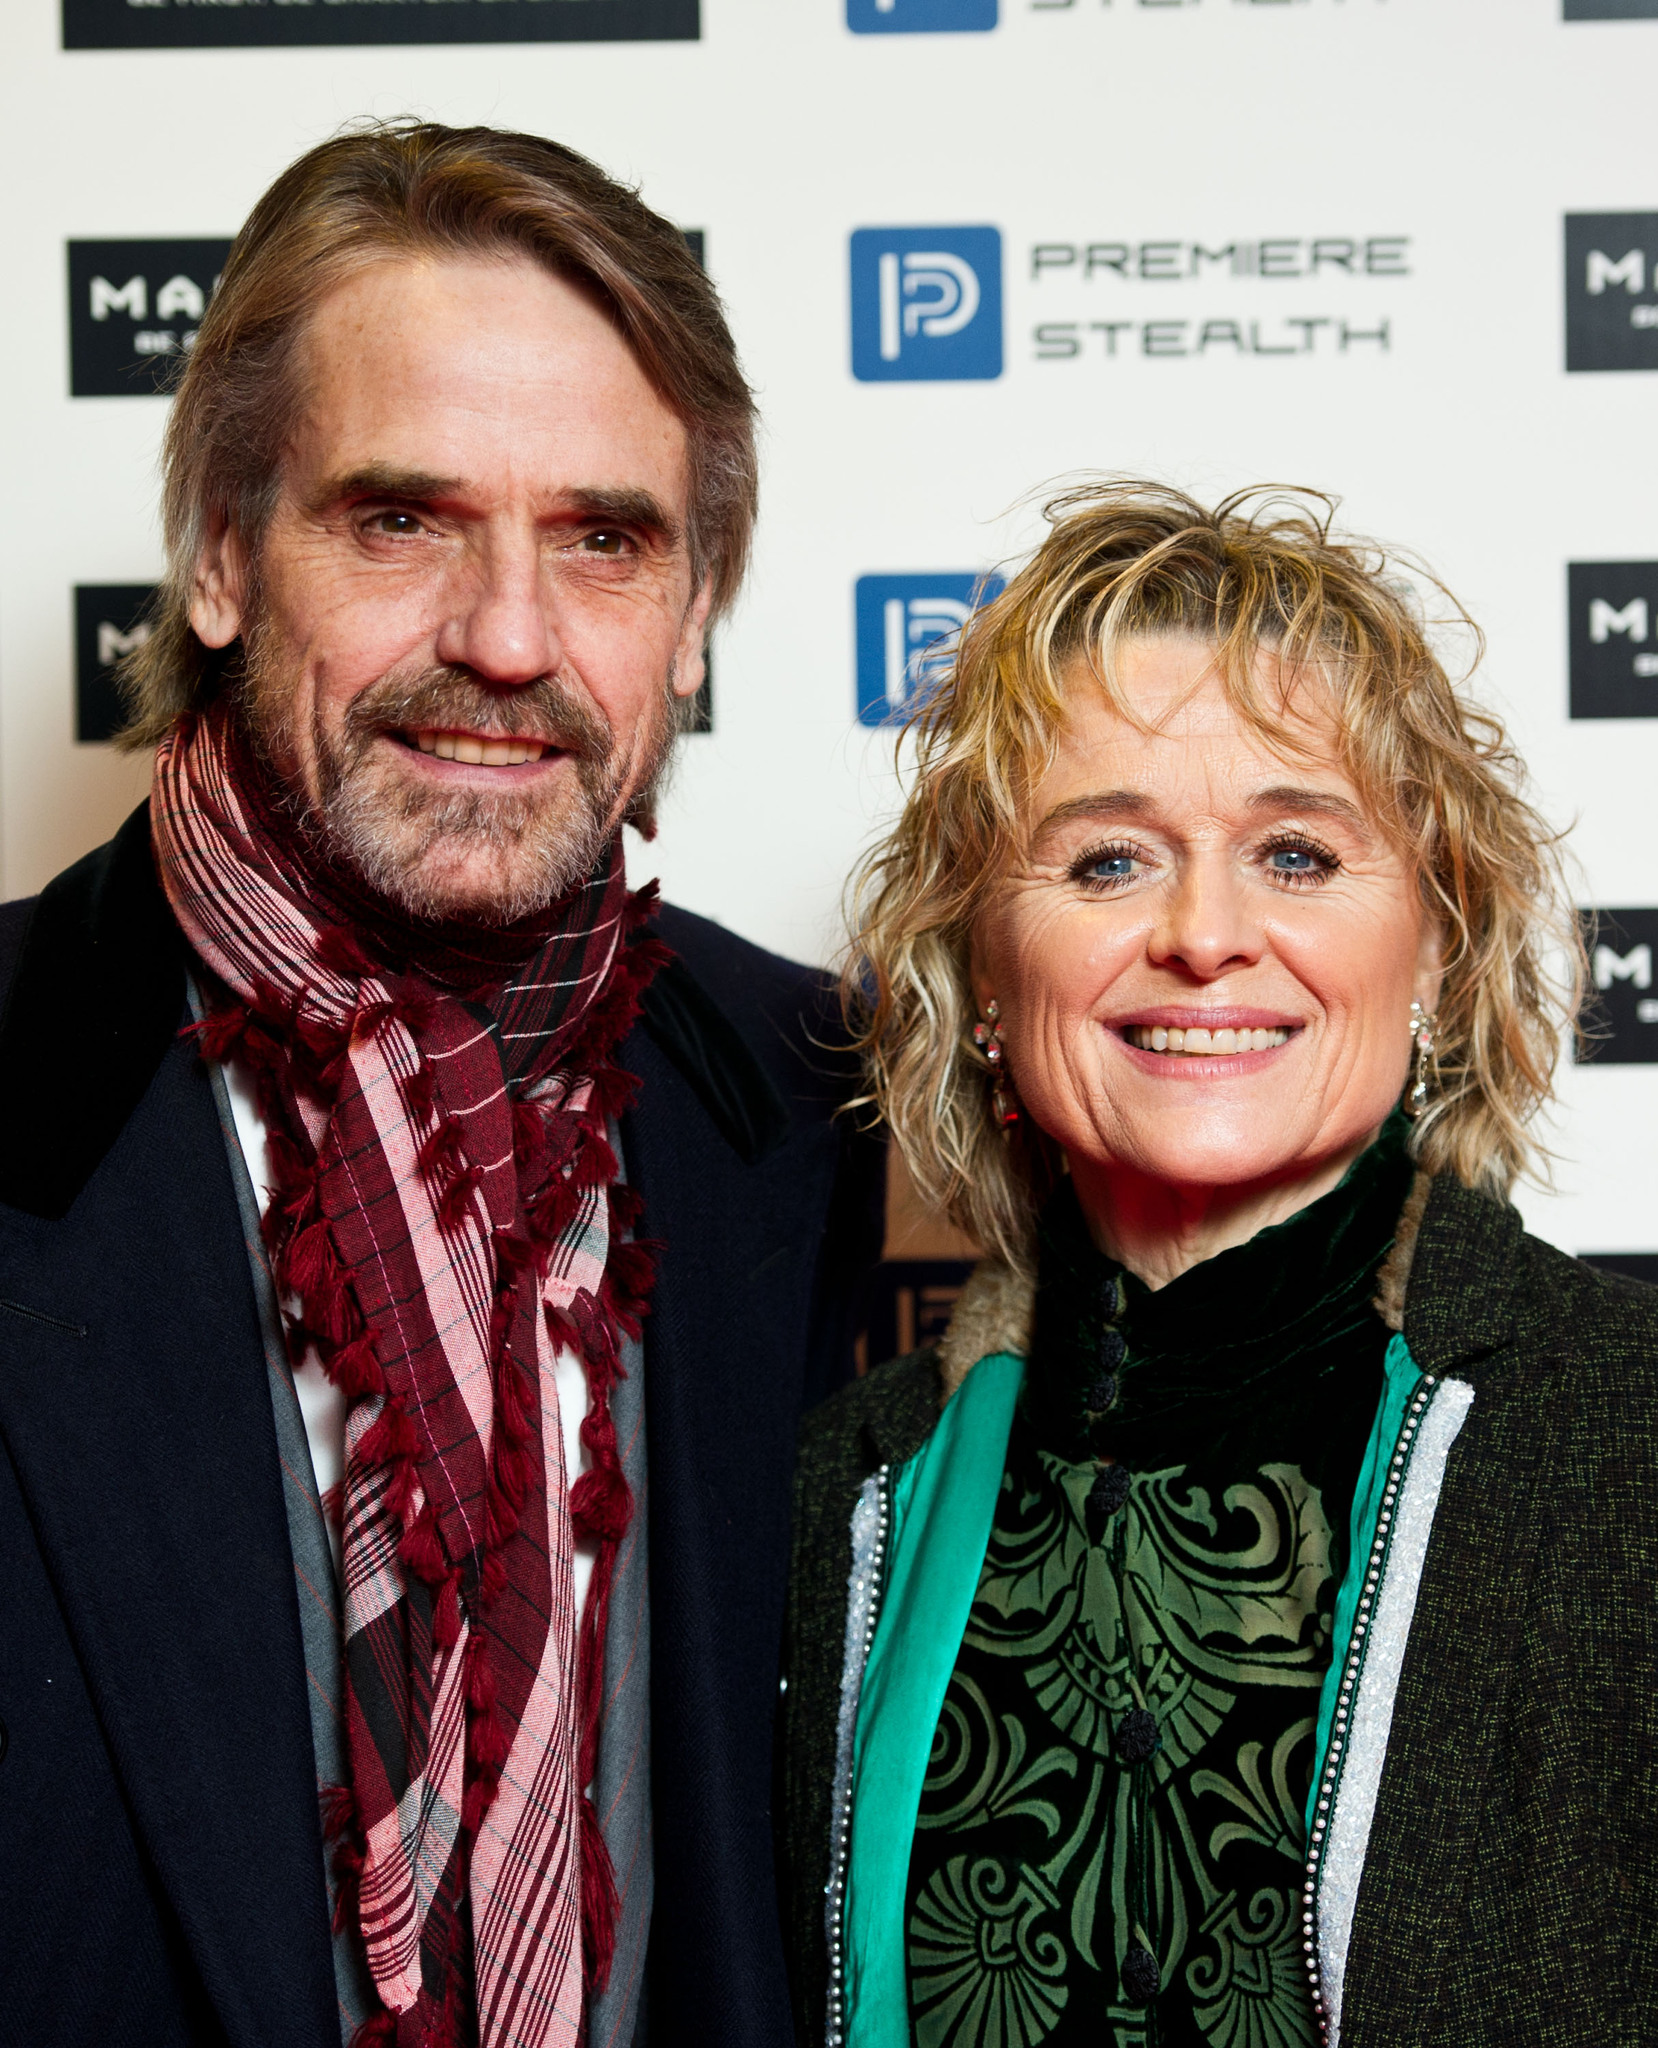 Jeremy Irons and Sinéad Cusack